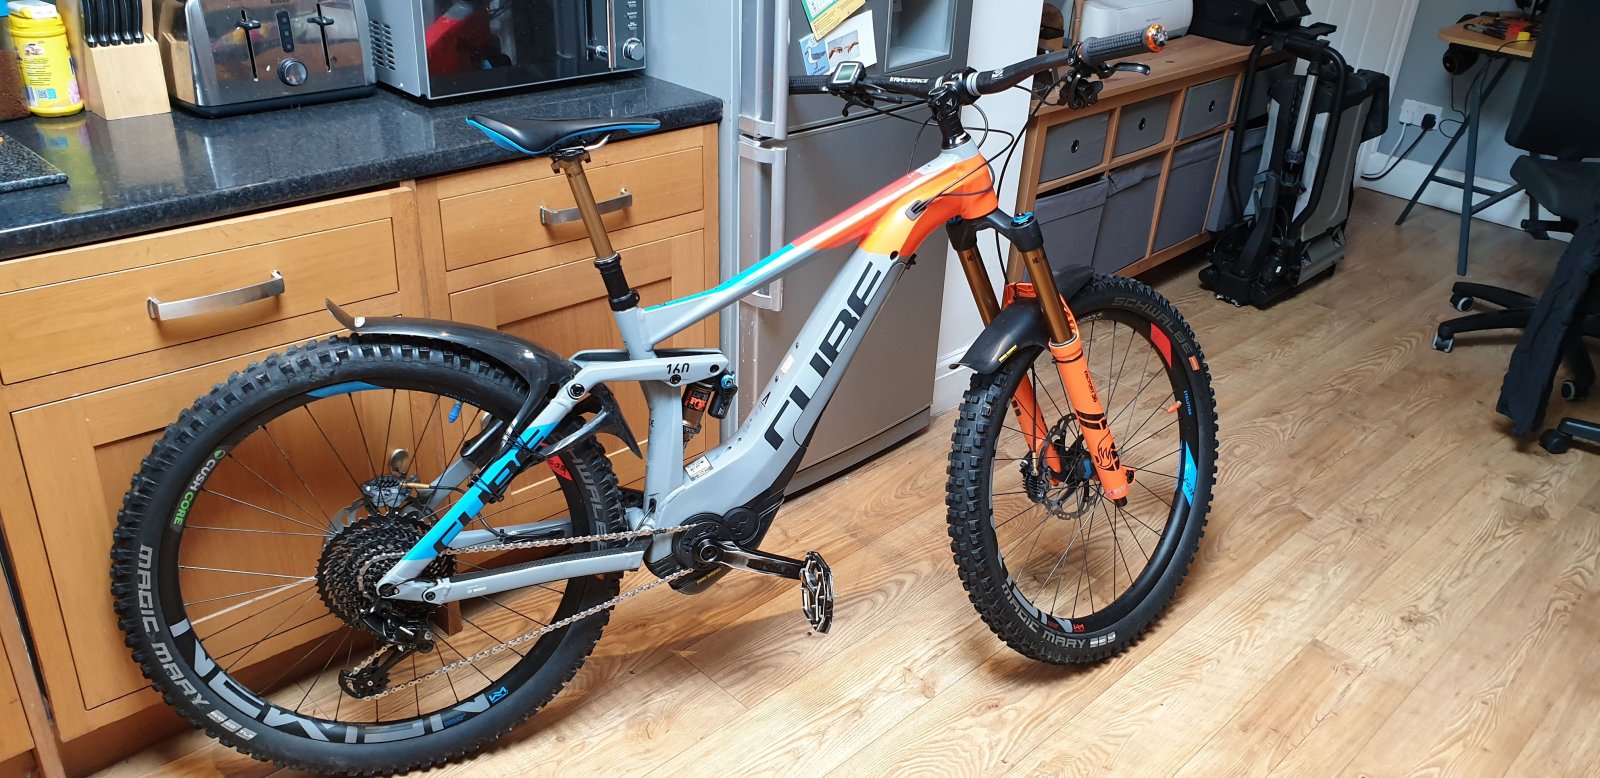 Sold - 2018 Cube STEREO HYBRID 160 Action Team 500 27.5. size:Medium updated £3800 | EMTB Forums